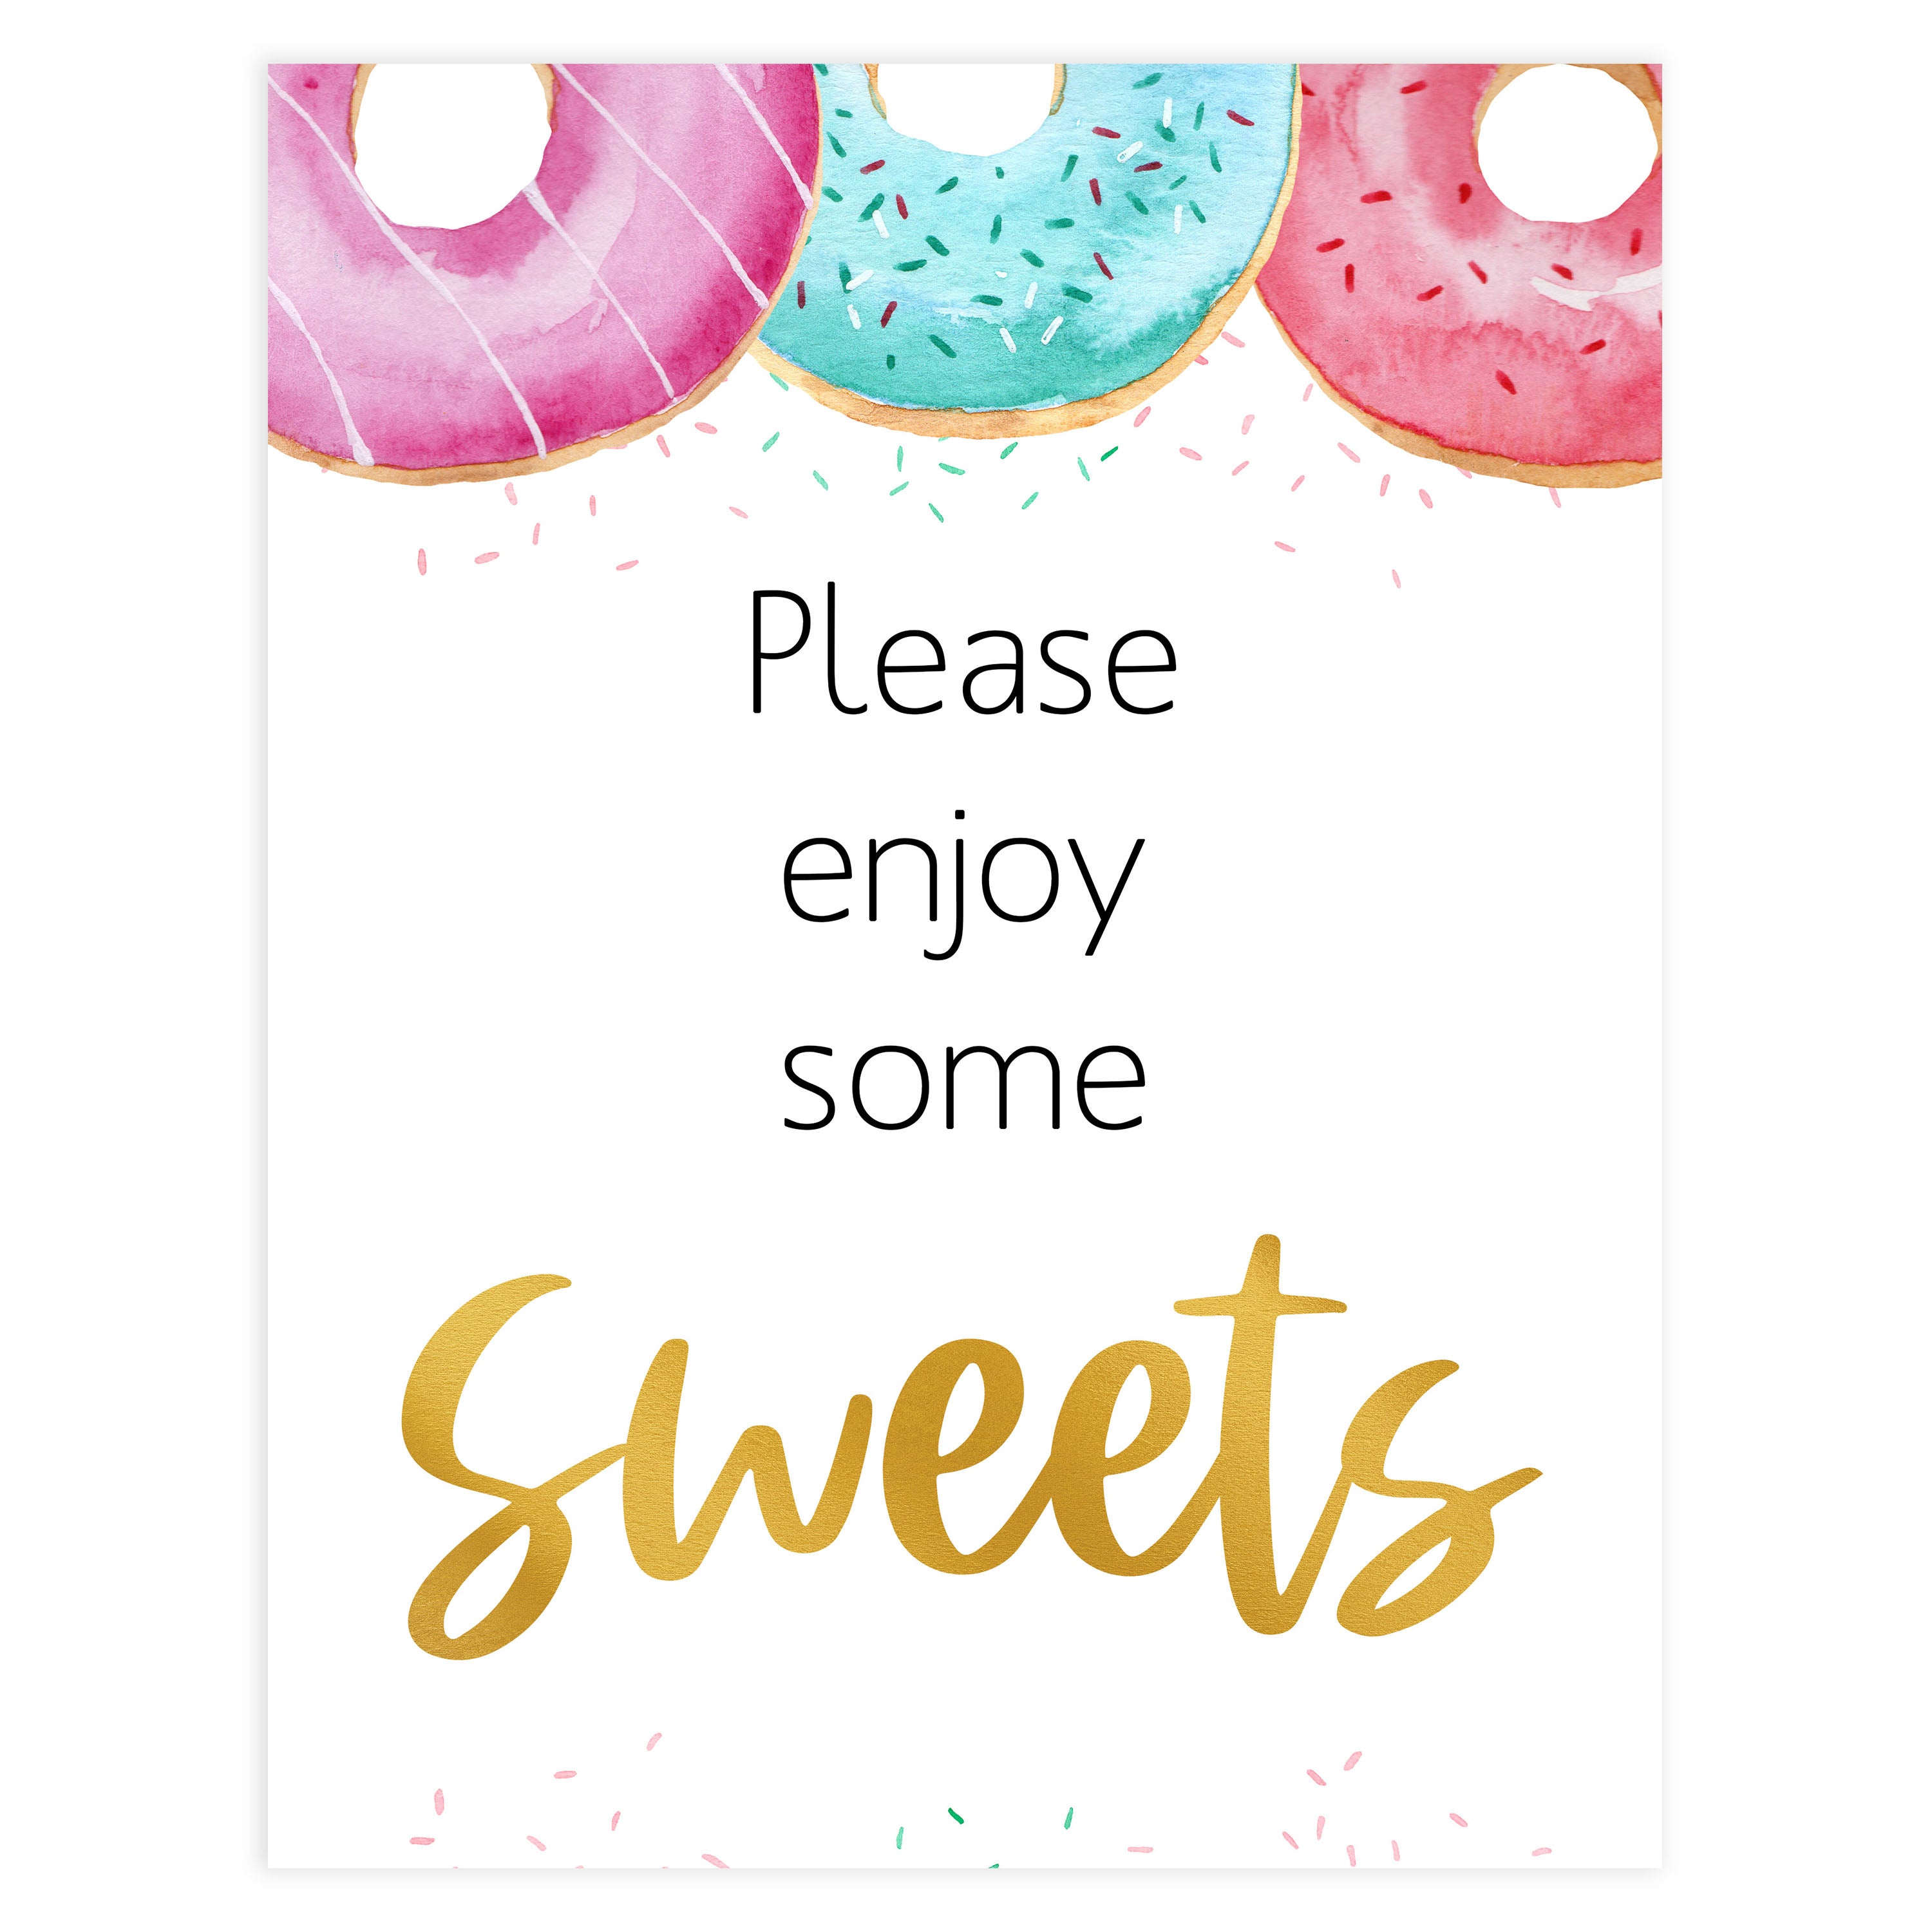 sweets baby table sign, Donut baby decor, printable baby table signs, printable baby decor, baby sprinkles table signs, fun baby signs, baby donut fun baby table signs